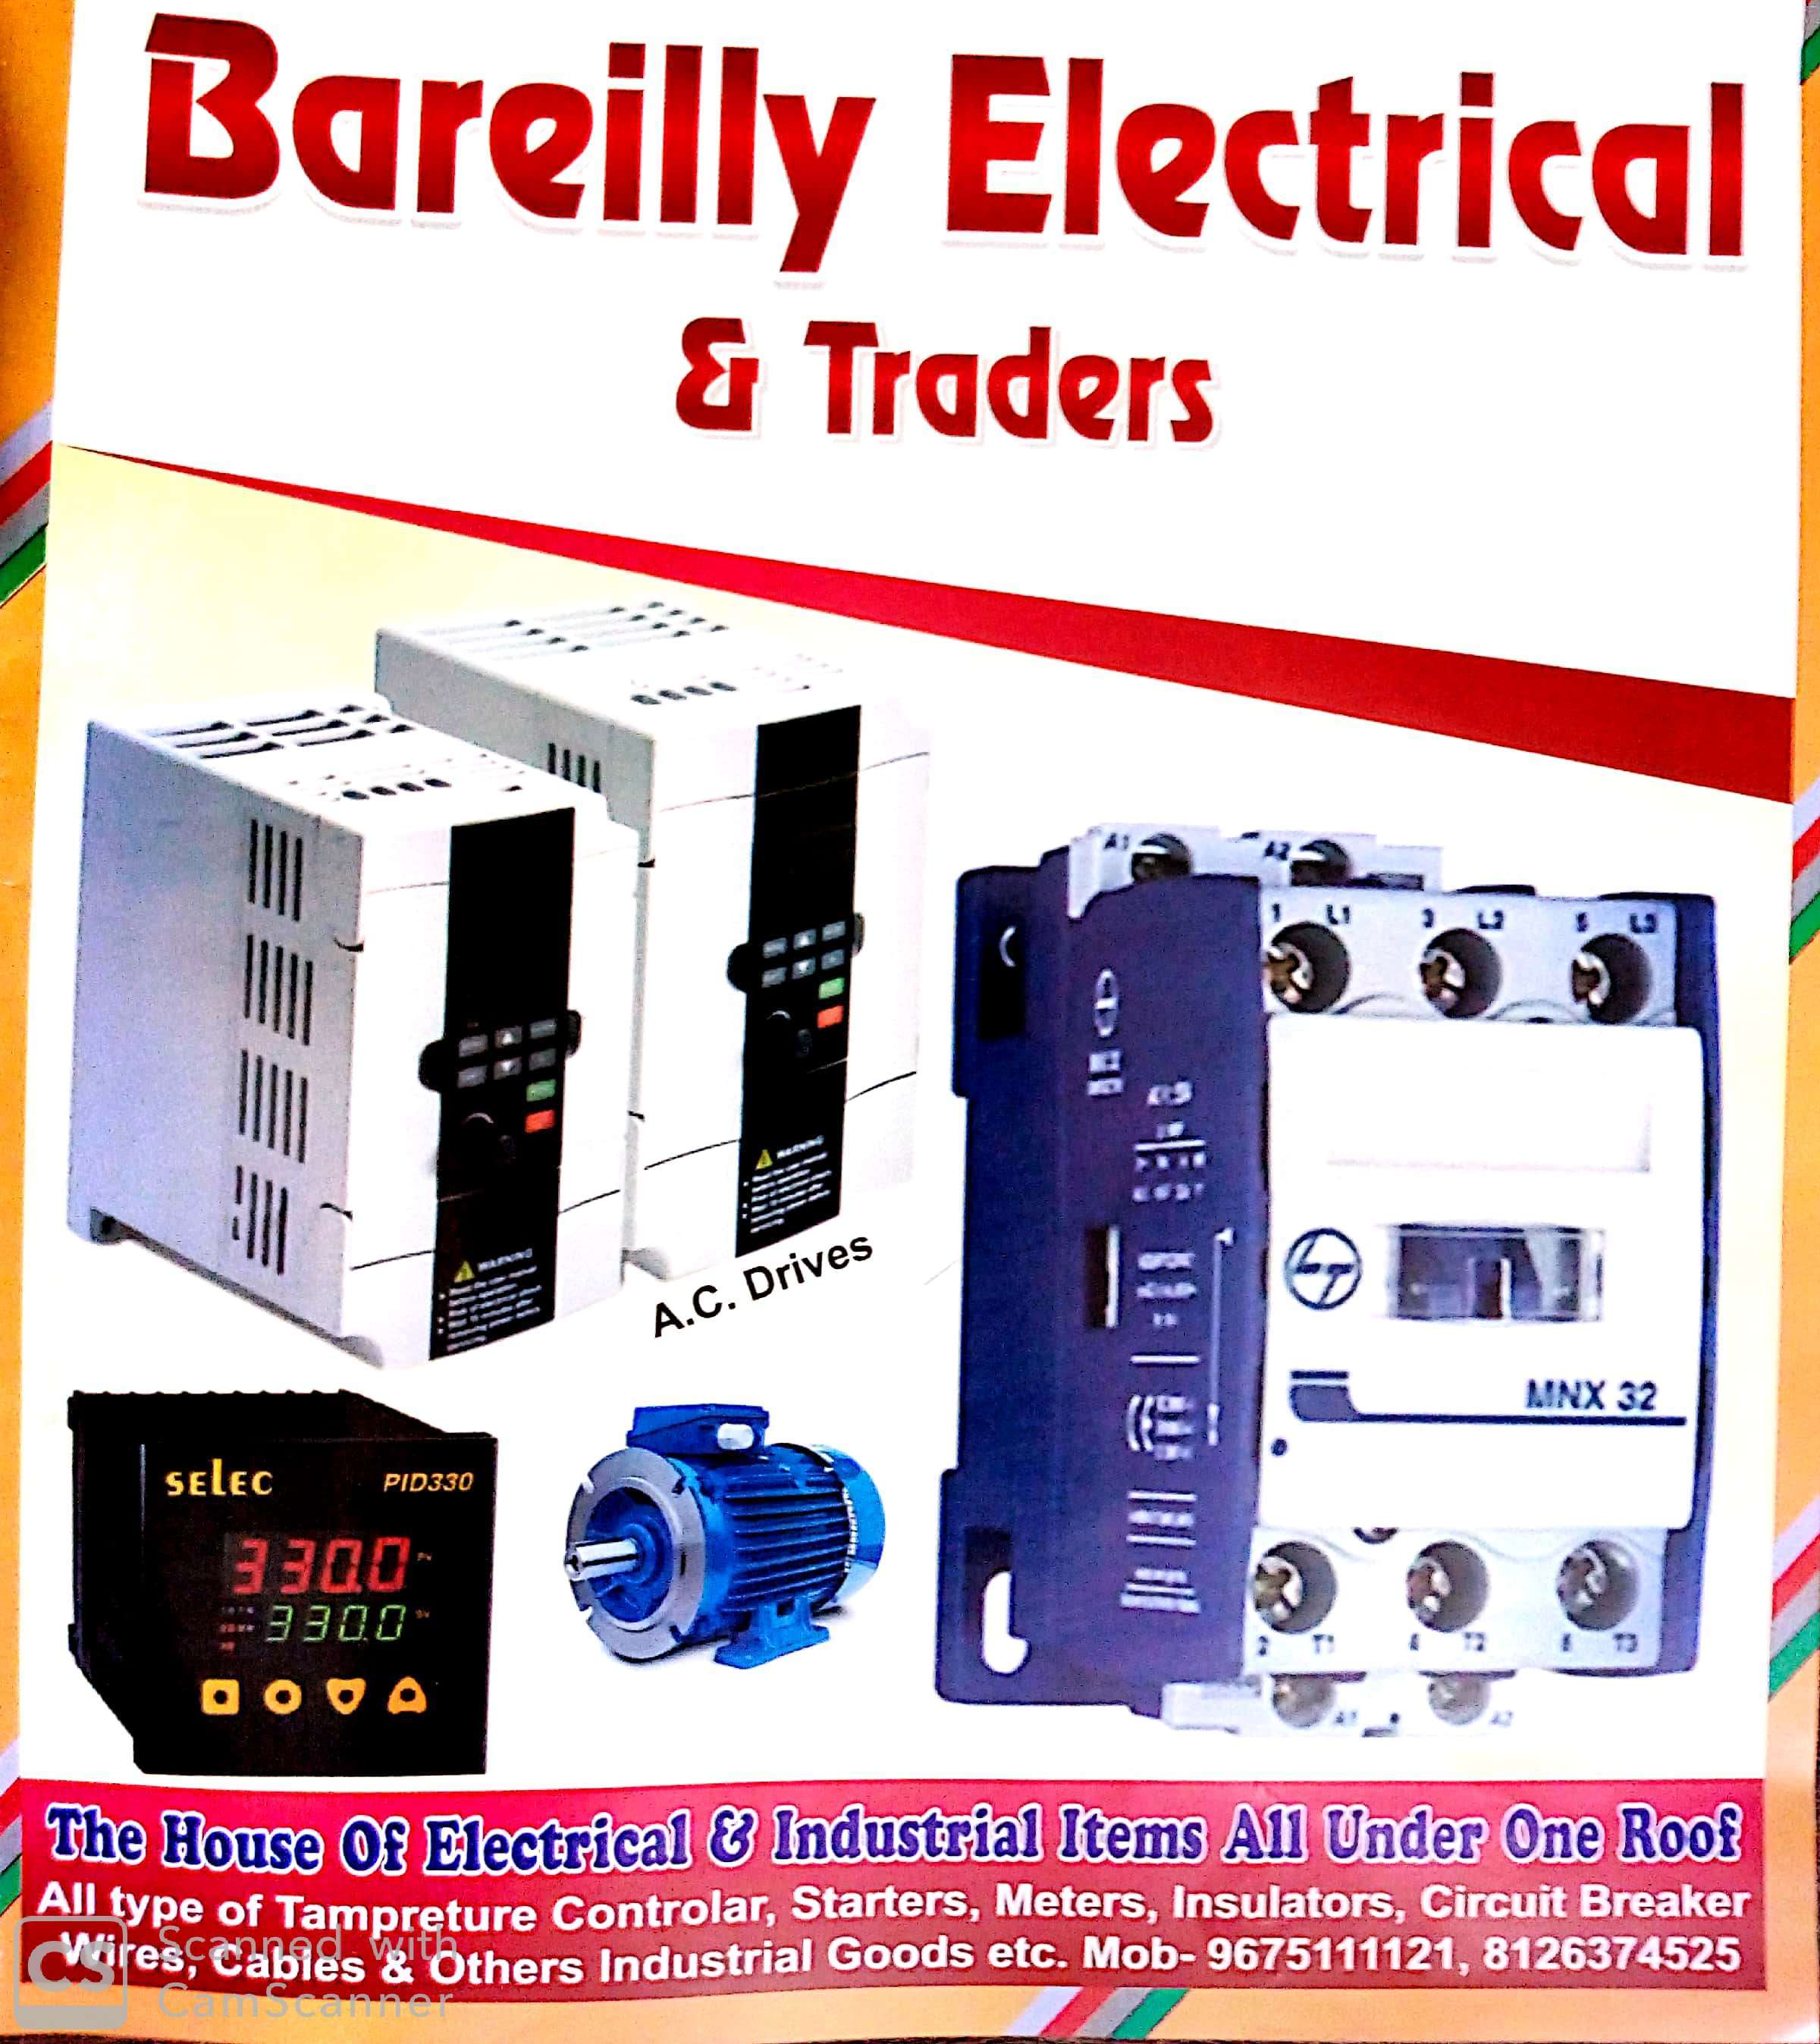 Bareilly Electrical And Traders